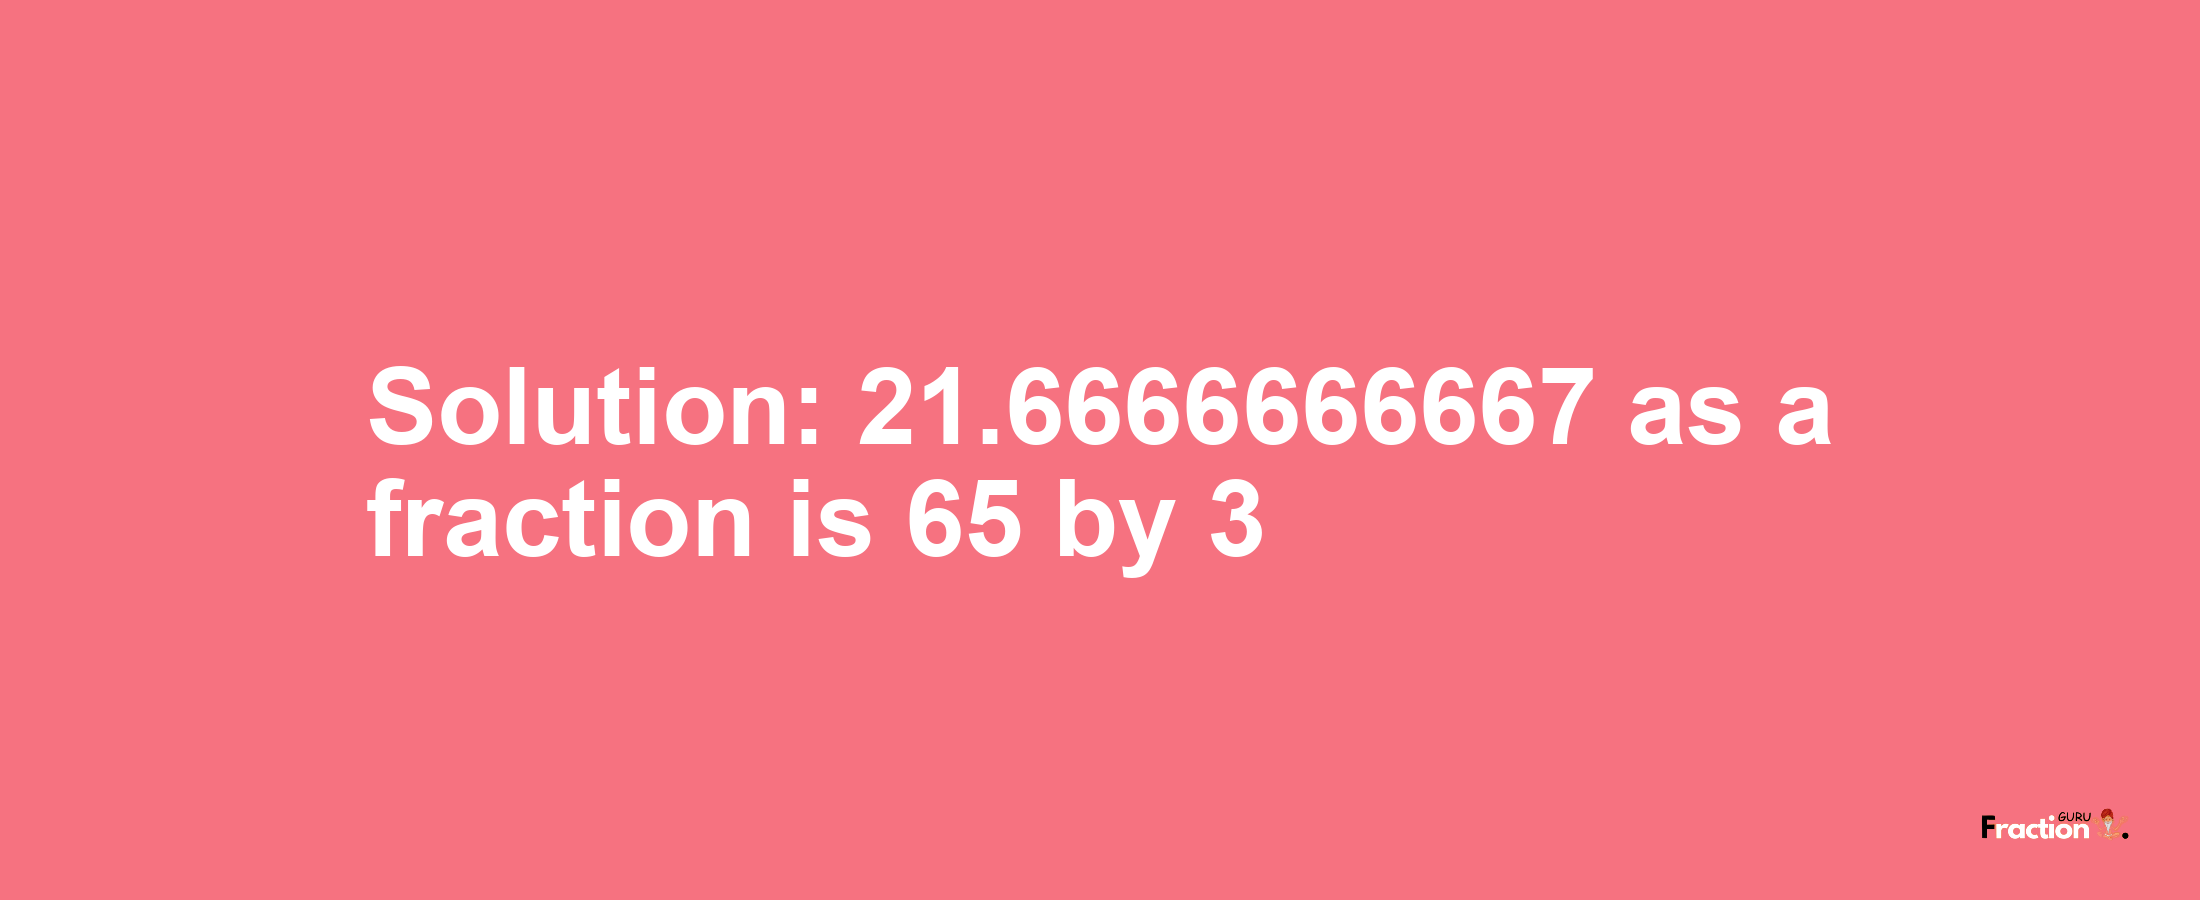 Solution:21.6666666667 as a fraction is 65/3